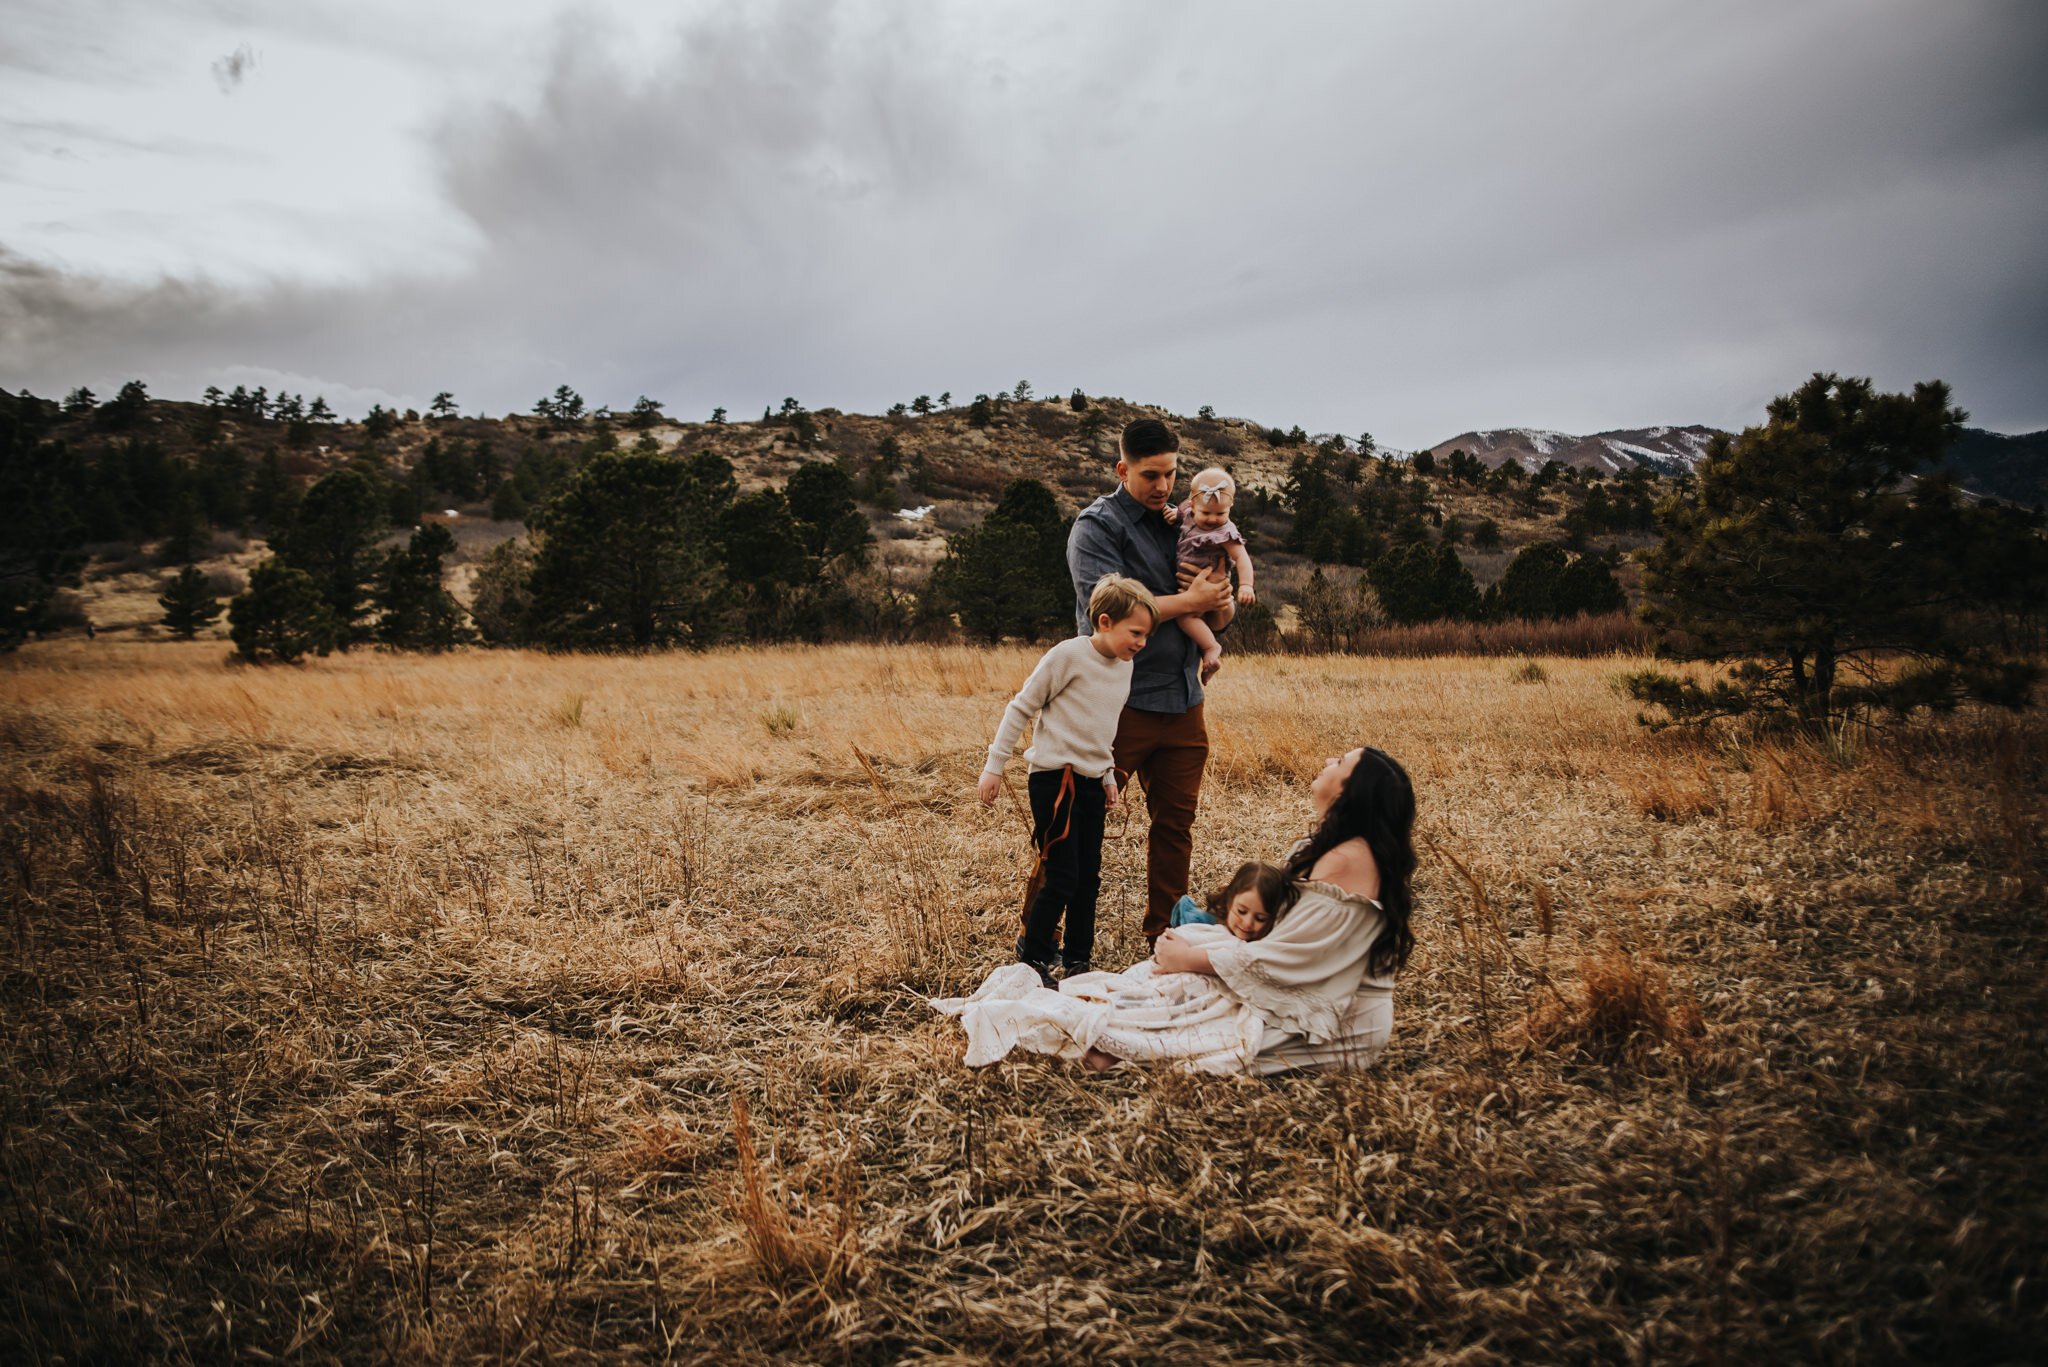 Miller+Family+Session+Mentorship+Colorado+Springs+Colorado+Sunset+Ute+Valley+Park+Mountains+Fields+Mom+Dad+Son+Daughter+Baby+Wild+Prairie+Photography-06-2020.jpeg